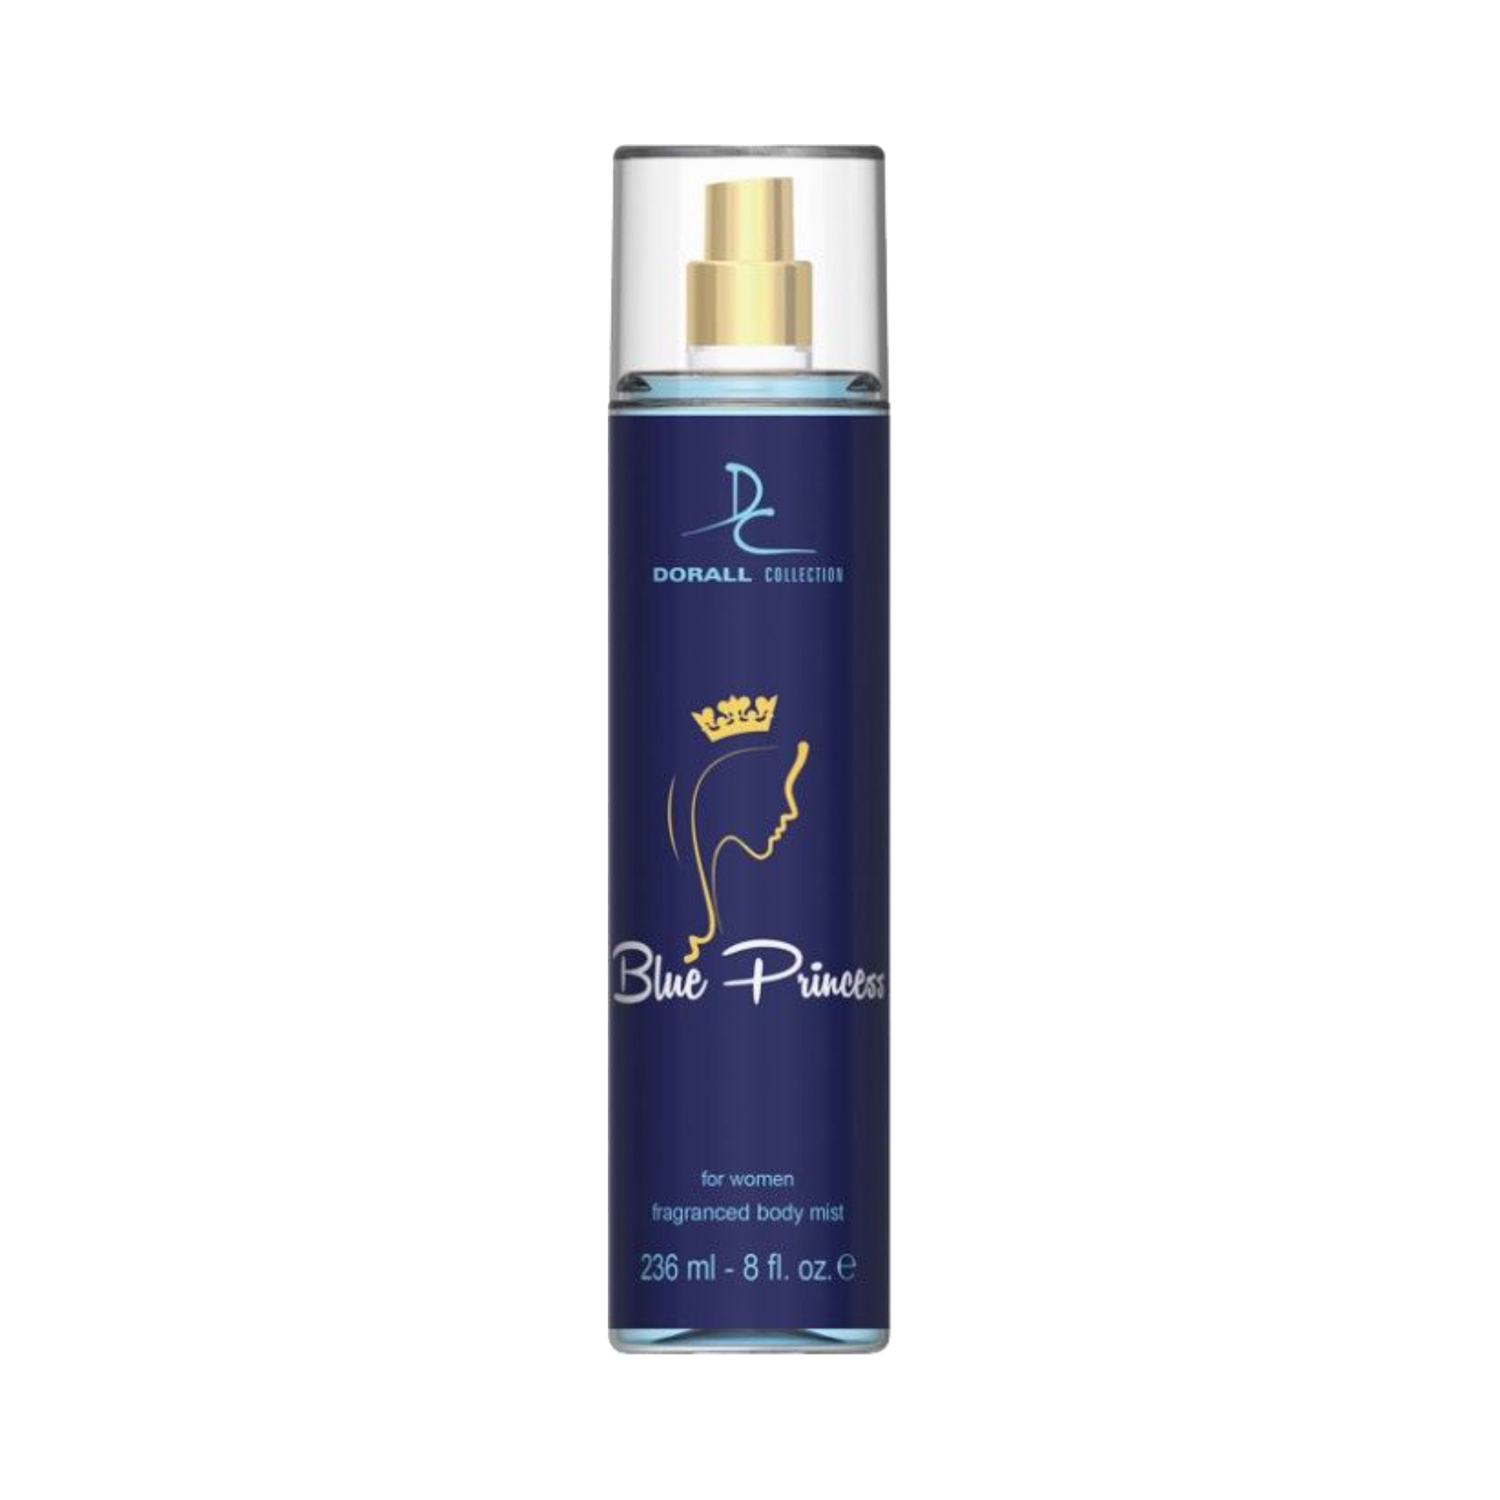 Dorall Collection | Dorall Collection Blue Princess Fragrance Body Mist (236ml)